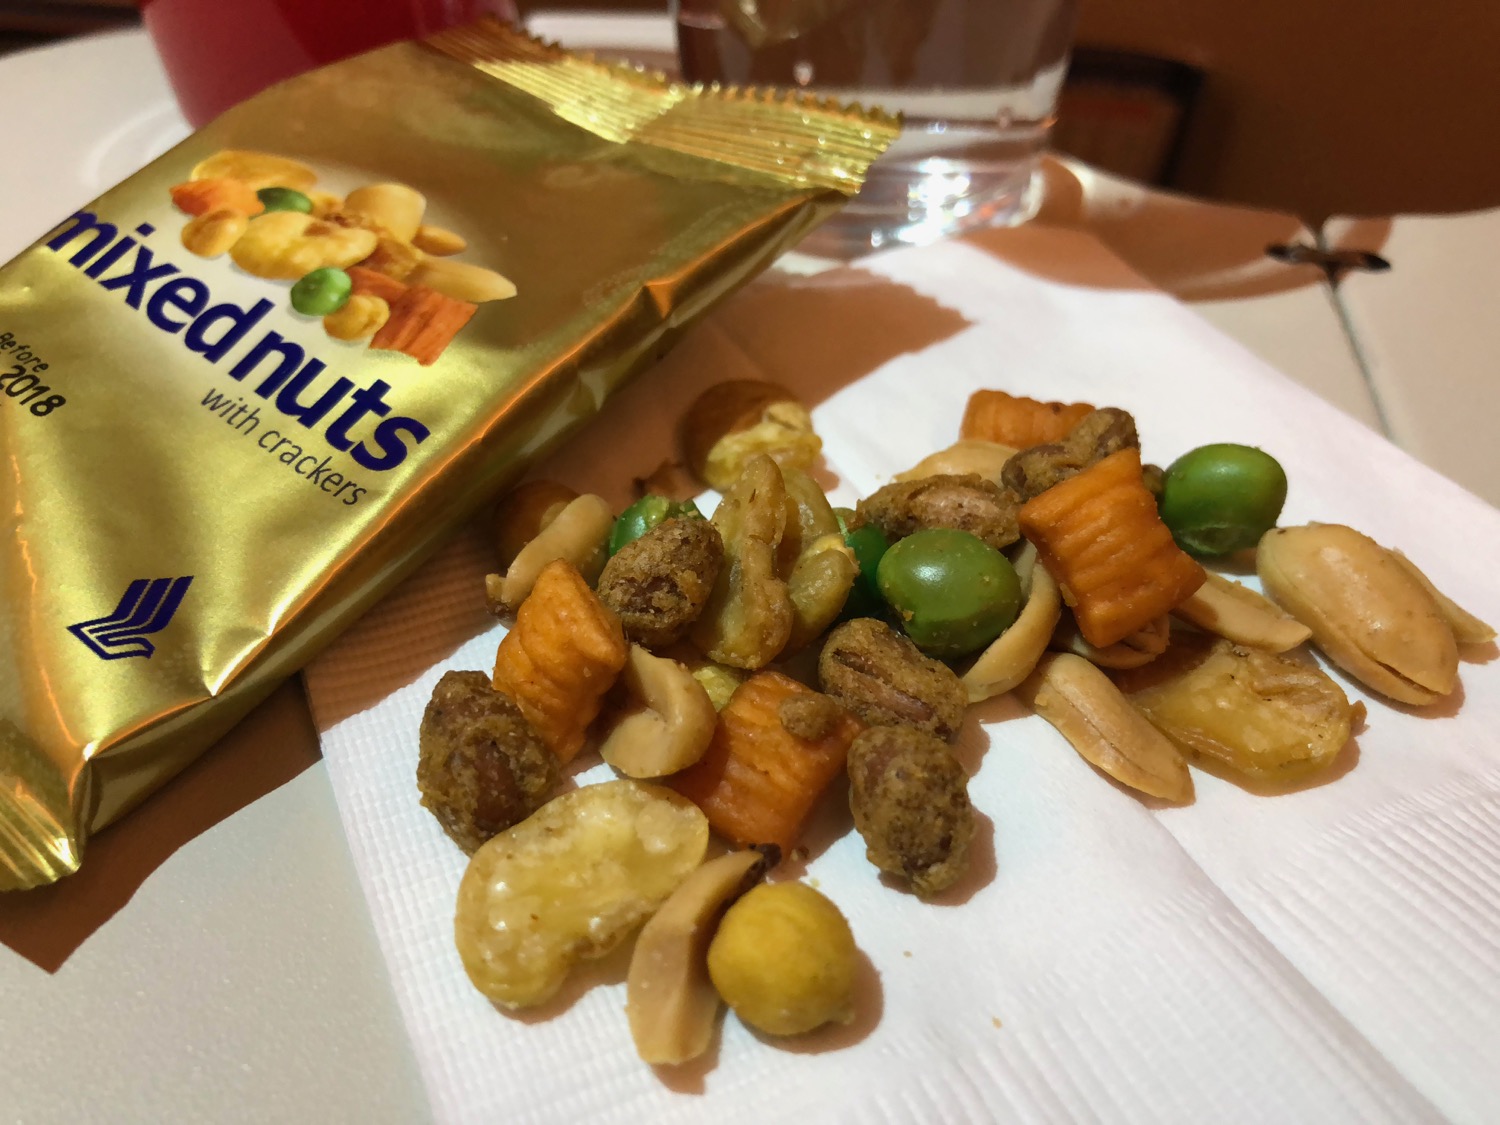 a pile of nuts and crackers on a napkin